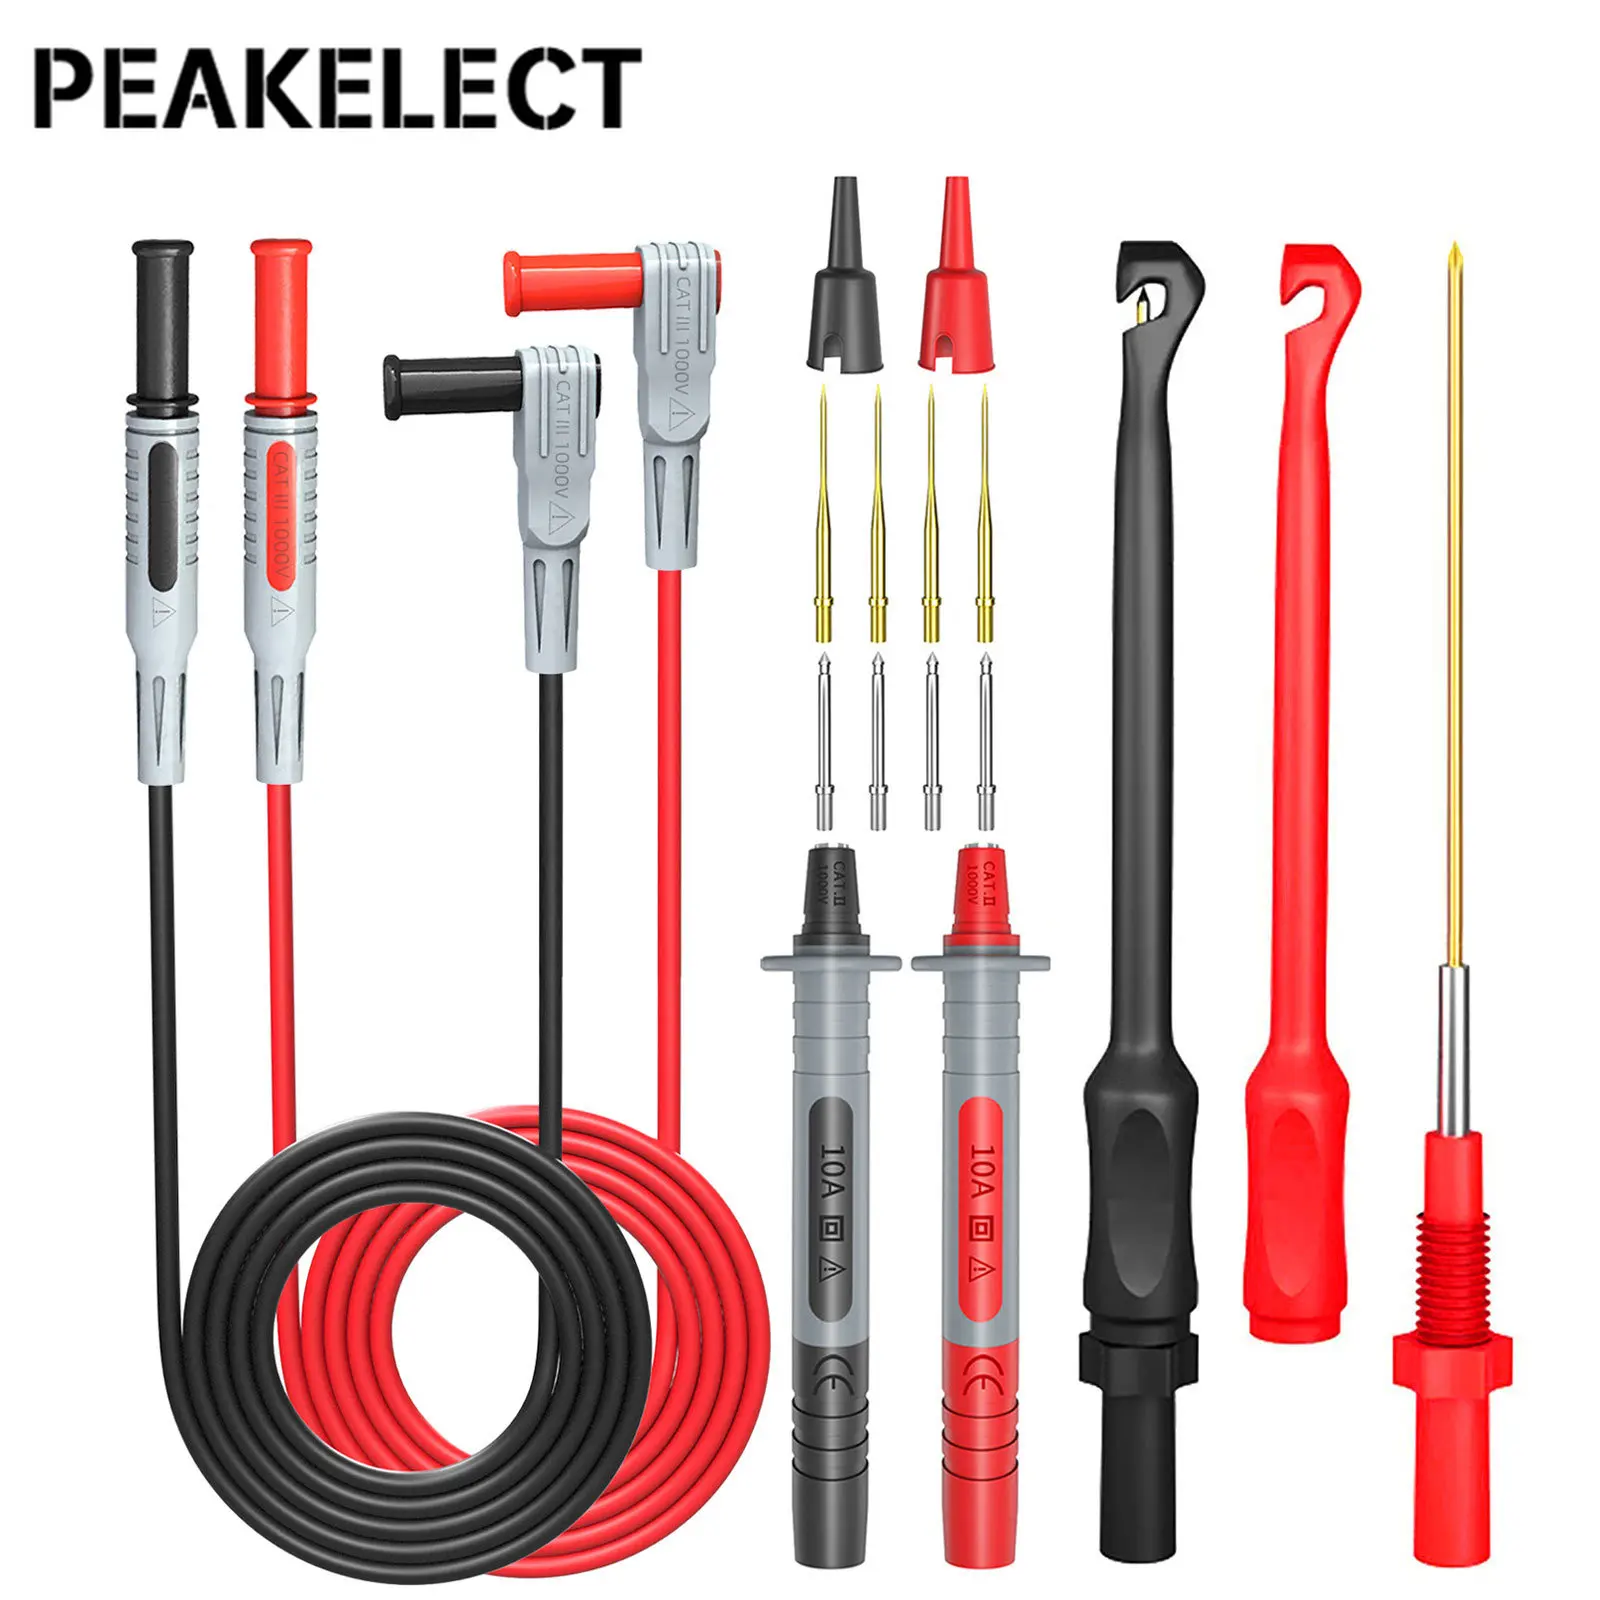 Peakelect P1033B Multimeter Test Probes Leads Kit with Wire Piercing Puncture 4mm Banana Plug Test Leads Test Probes jzdz multimeter test lead kit alligator clip to 4 mm banana plug test probe back probes kit jt8008